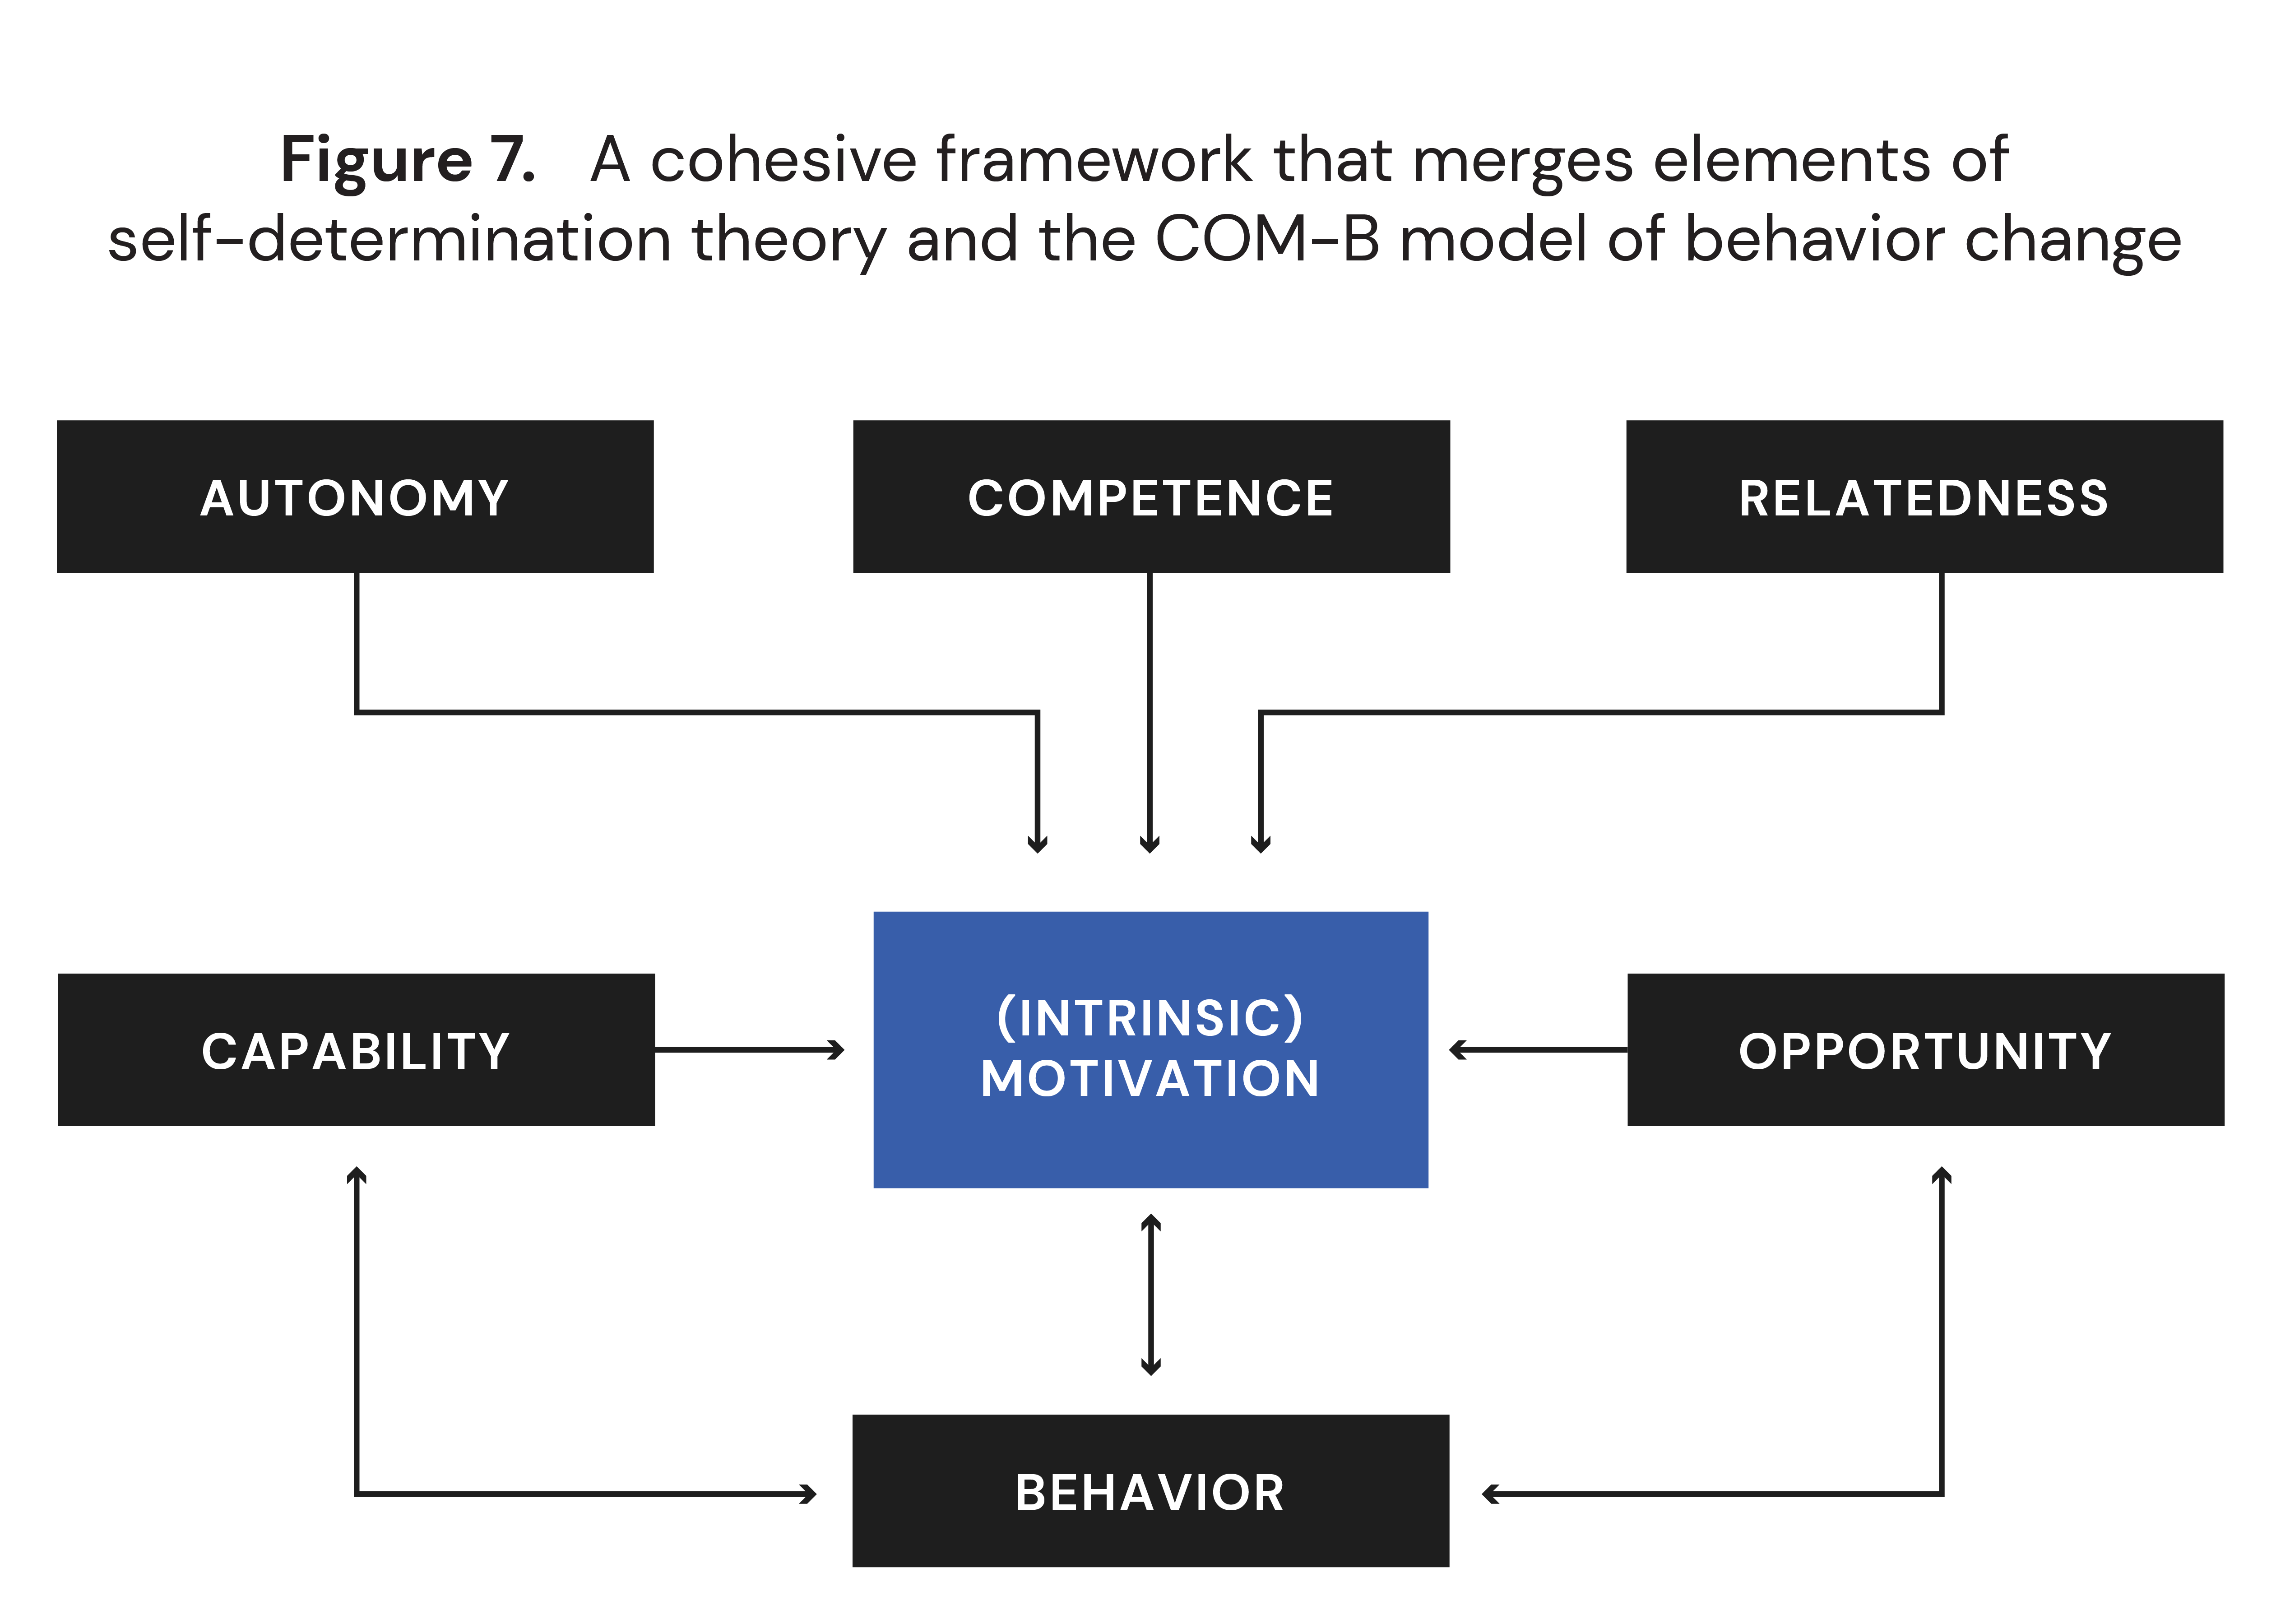 A cohesive framework that merges elements of self-determination theory and the COM-B model of behavior change